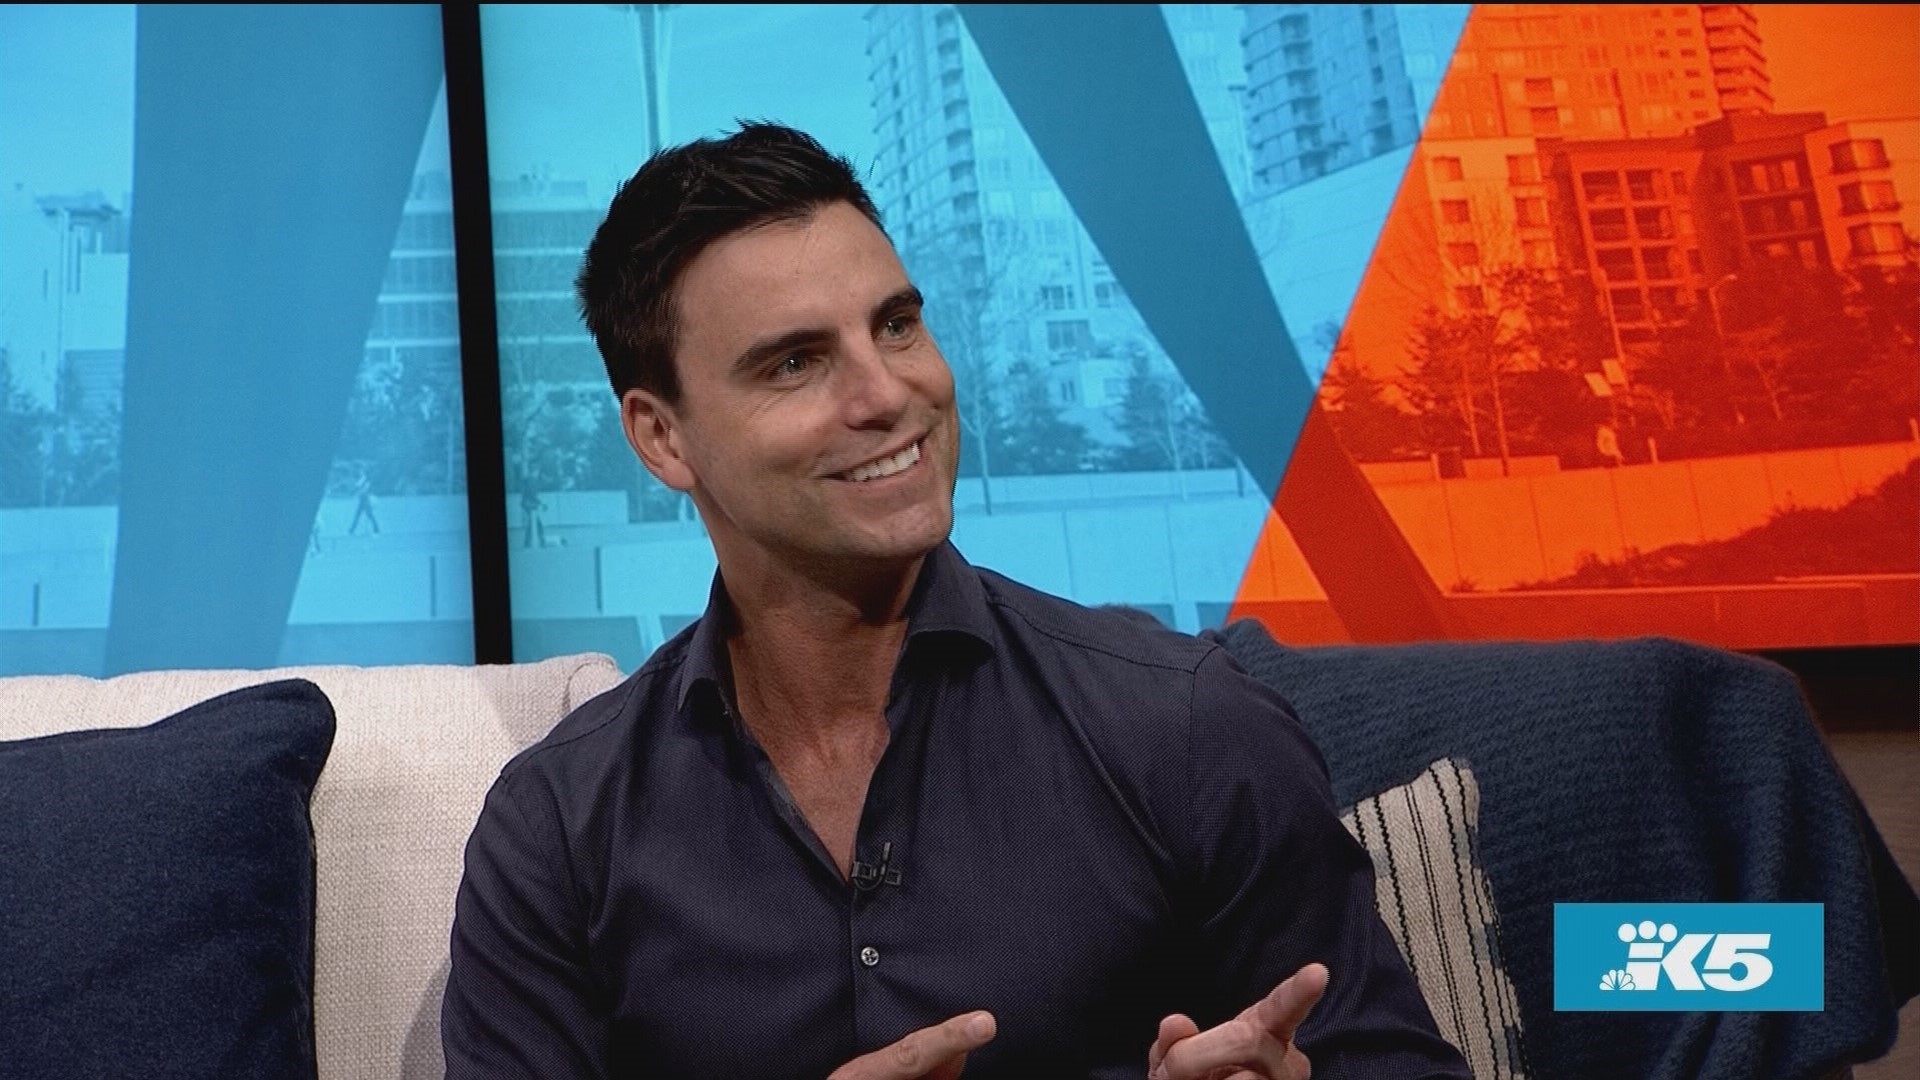 Before Colin Egglesfield was an actor, model, entrepreneur and now author, he was a shy and insecure kid growing up in suburban Chicago. In his book "Agile Artist: Life Lessons from Hollywood and Beyond," he shares several personal and authentic experiences that pushed him to fulfill his dream. Now an avid speaker at conferences and seminars, he hopes to inspire others to be their most creative and true selves. He joins New Day to discuss the book and his strategies for success.